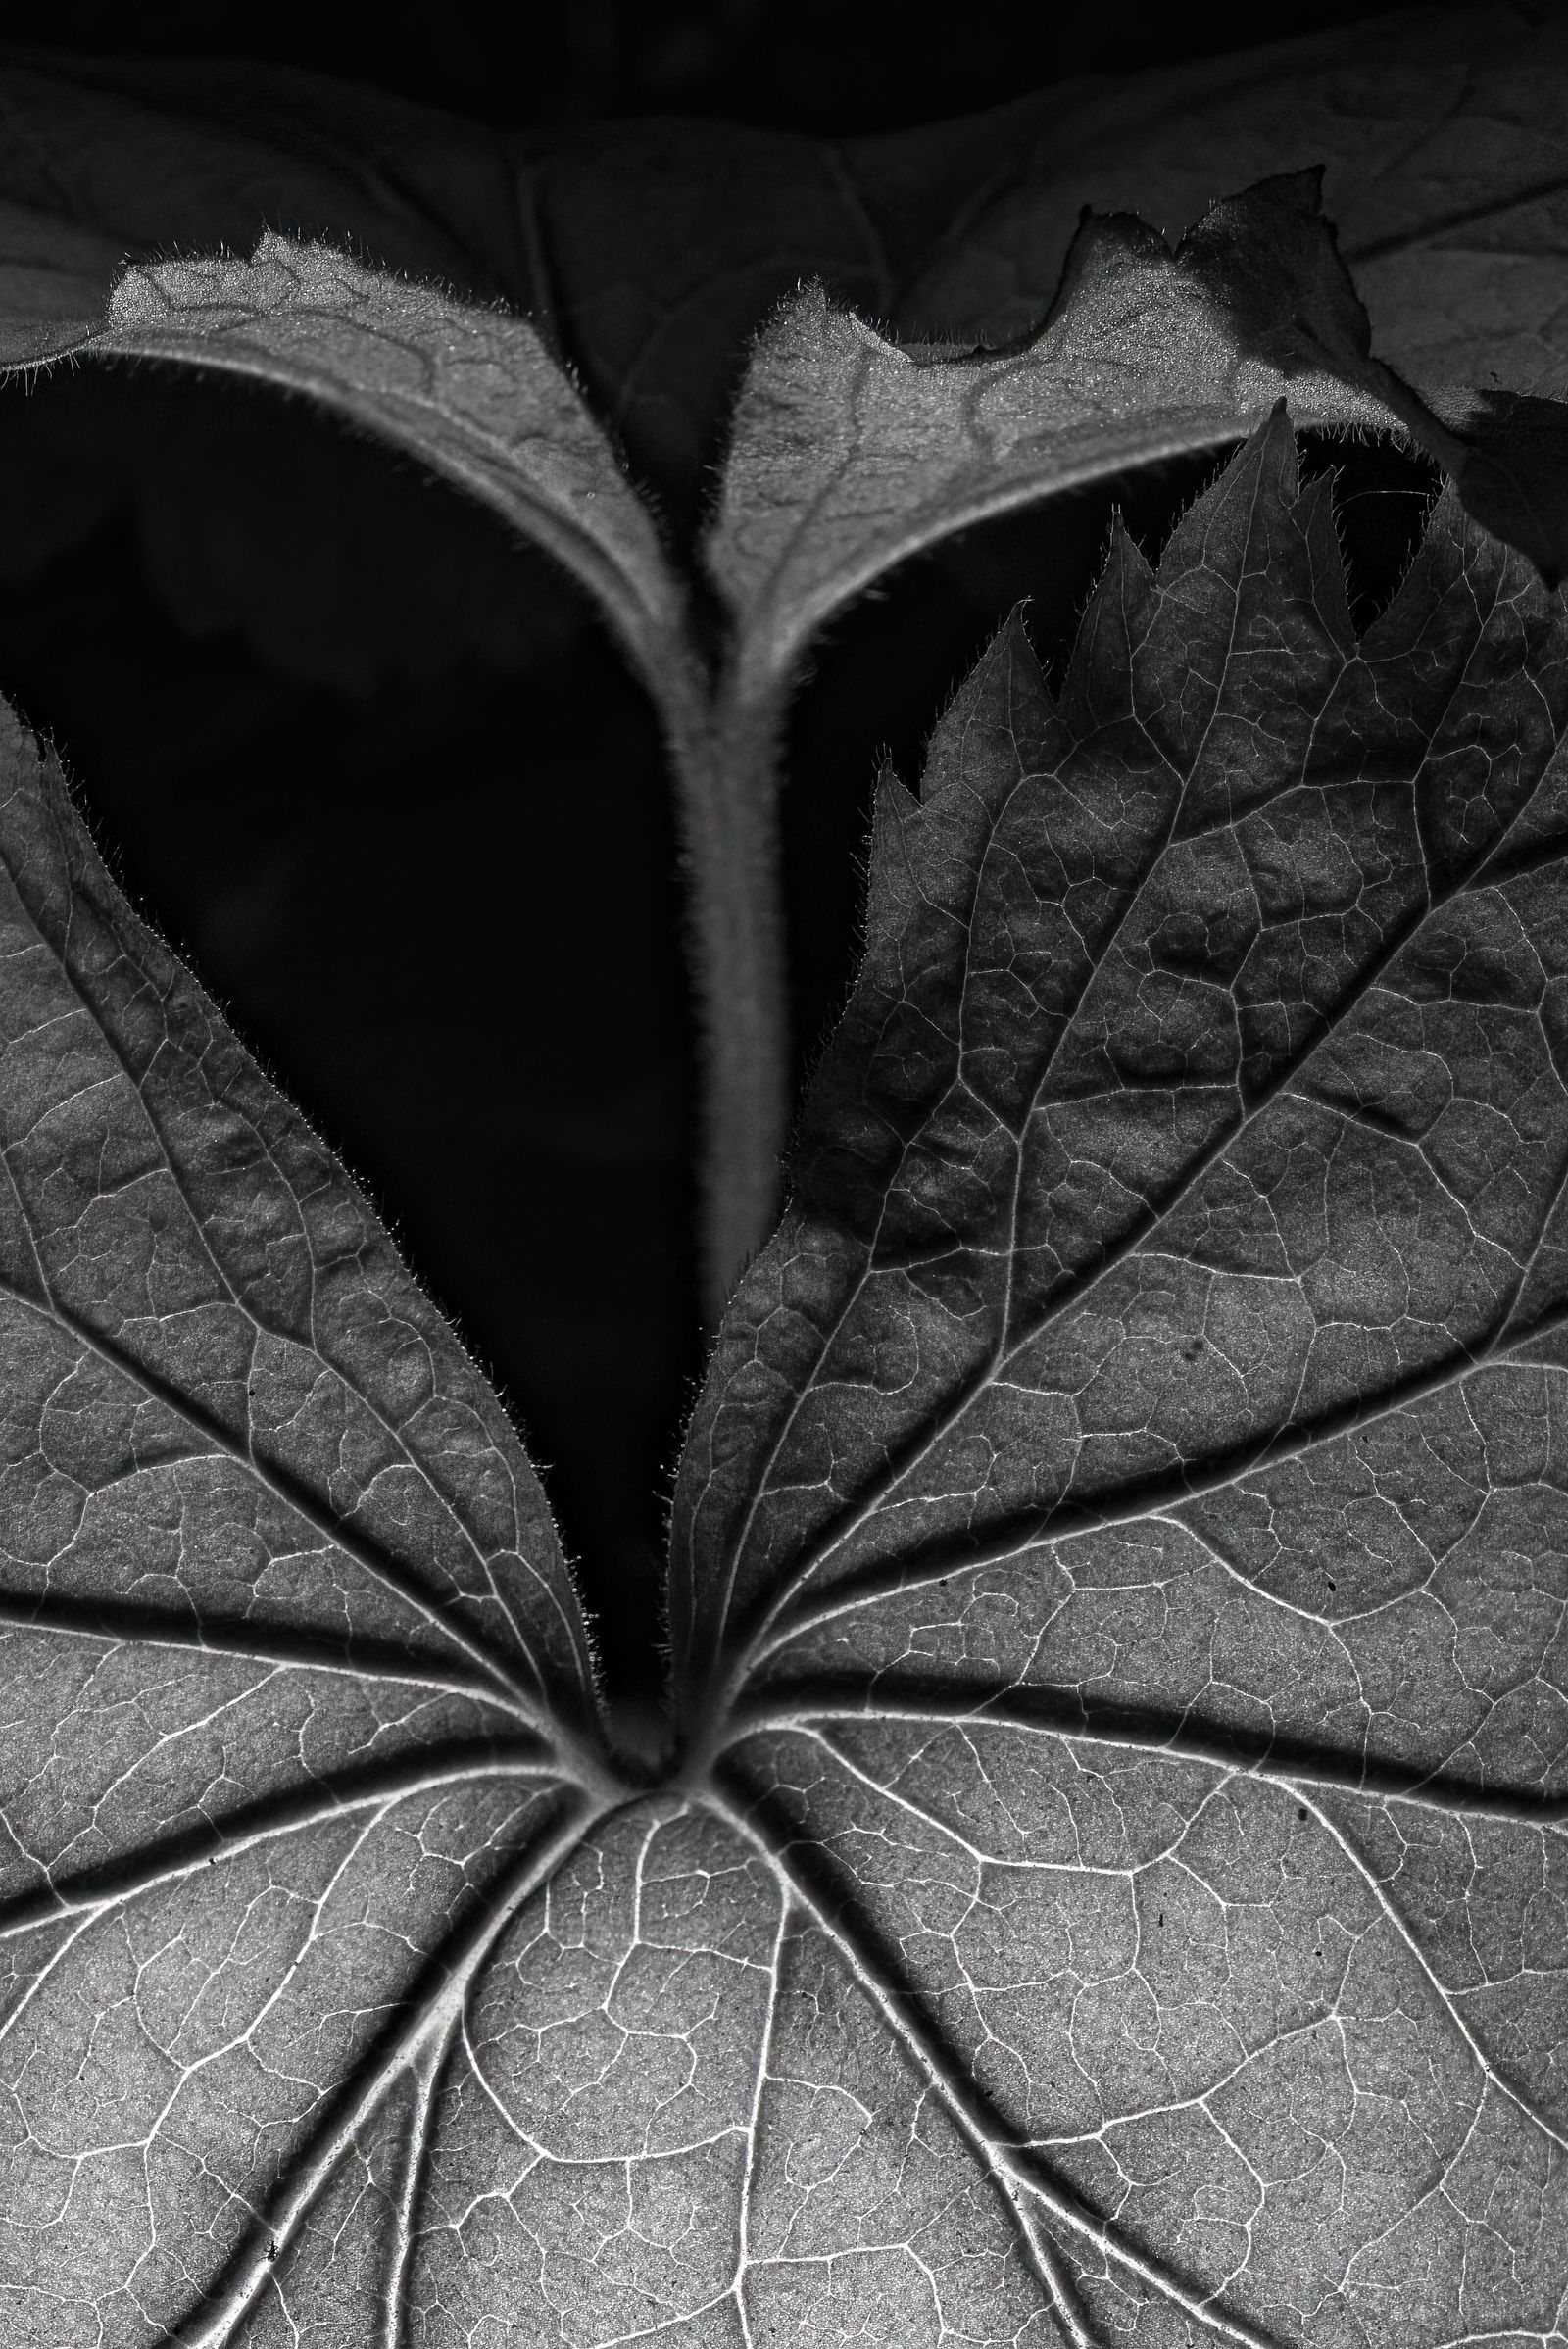 © Galapagensis - Image from the Veins, Neurons and Shadows photography project